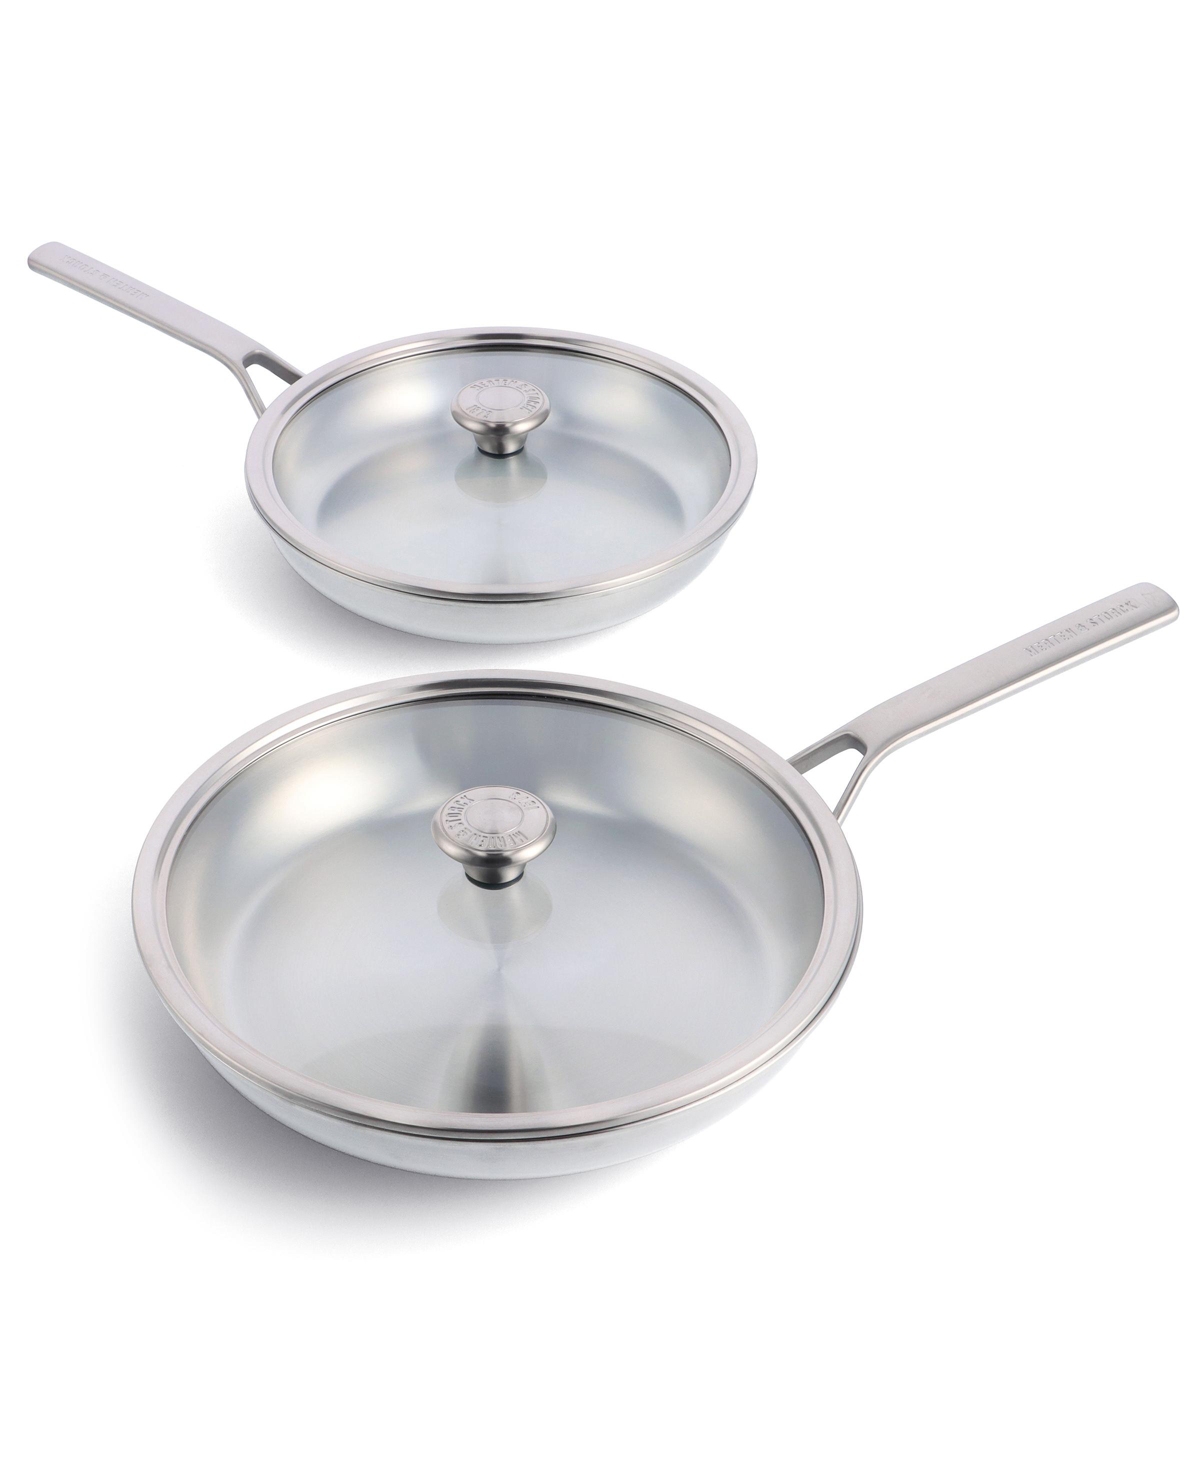 Merten & Storck Stainless Steel 10" And 12" Frypans Set With Lids